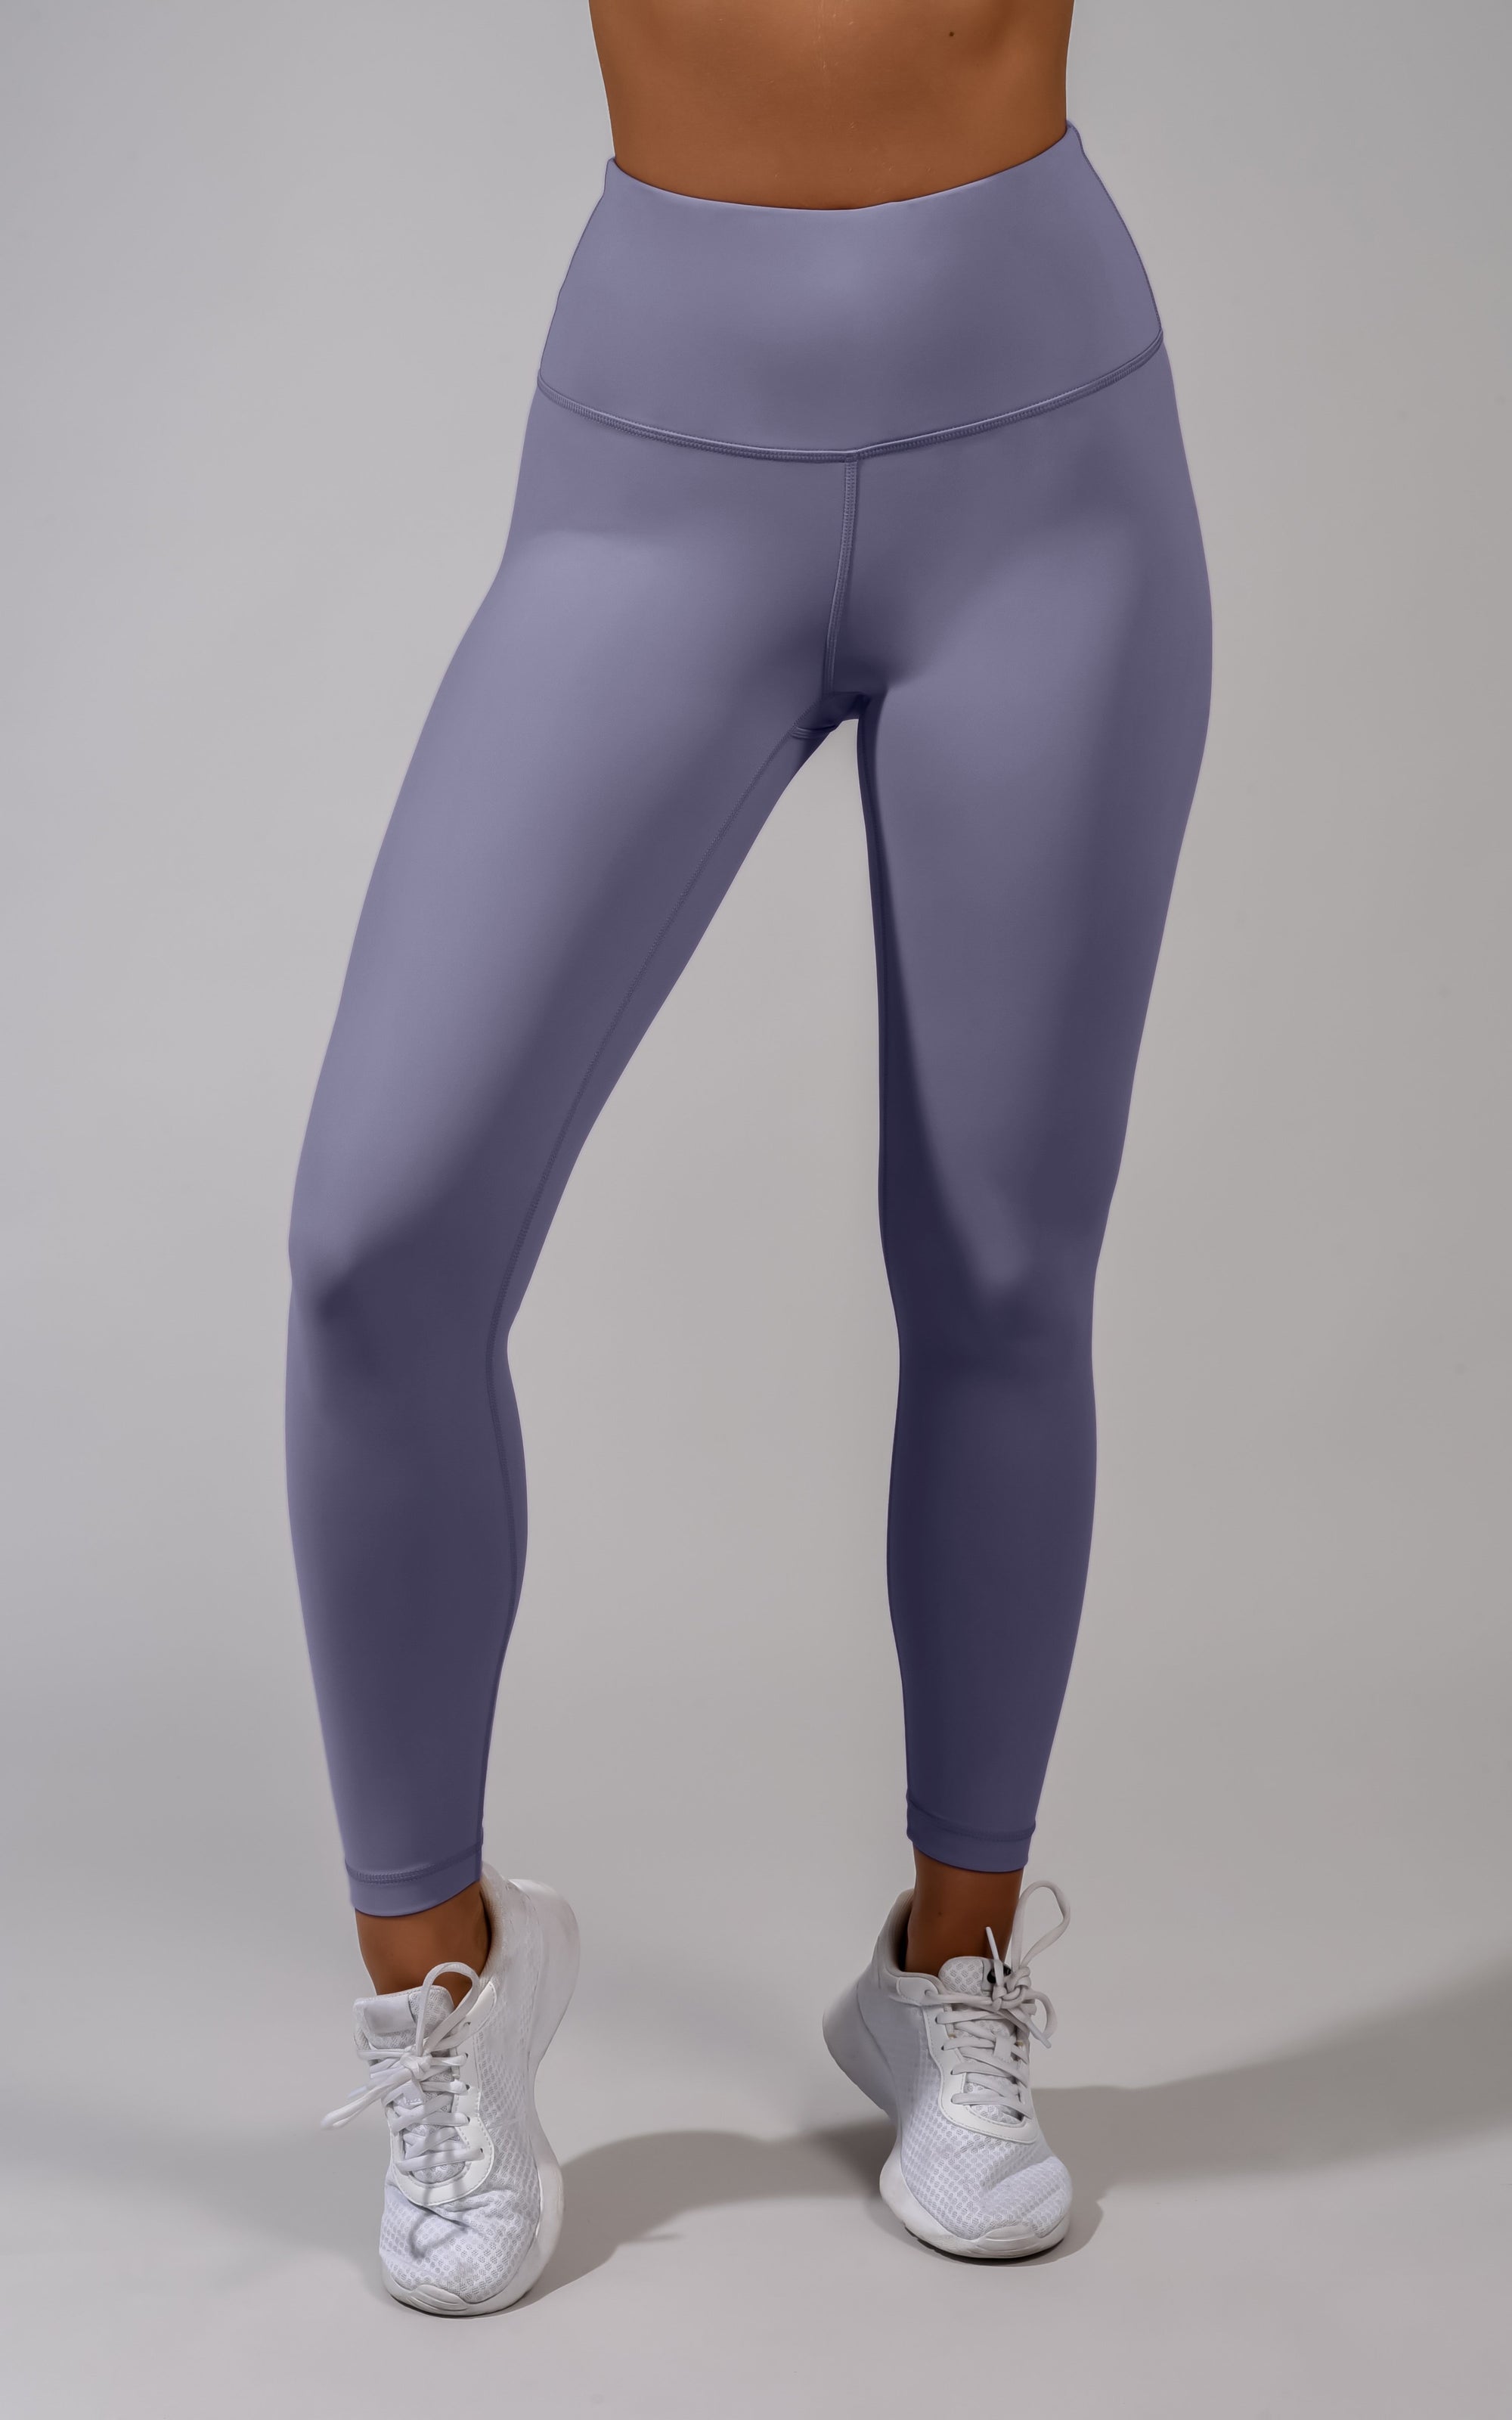 90 Degree By Reflex Lightweight Athletic Pants for Women